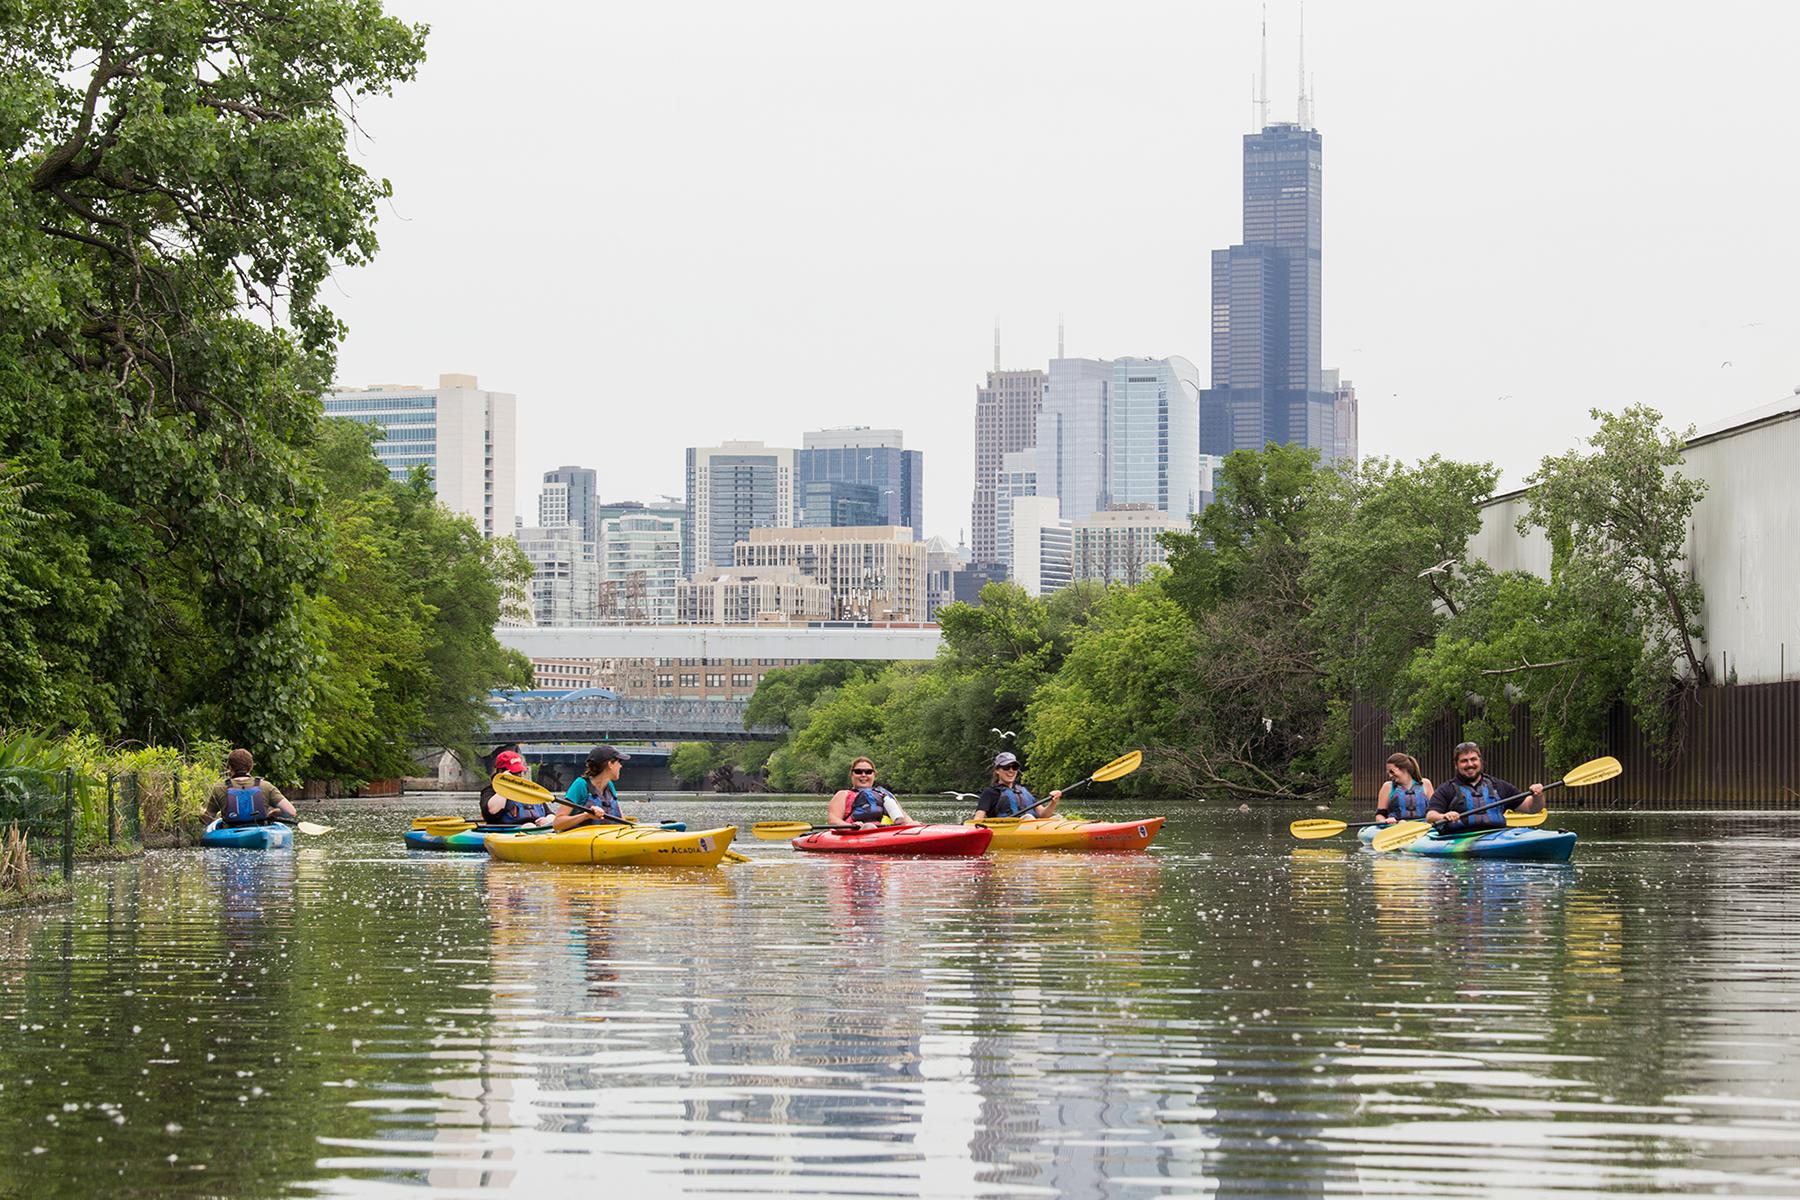 Shedd Aquarium's Kayak for Conservation program aims to introduce residents to the Chicago River ecosystem and the wildlife that call the waters home. (Hilary Wind / Shedd Aquarium)